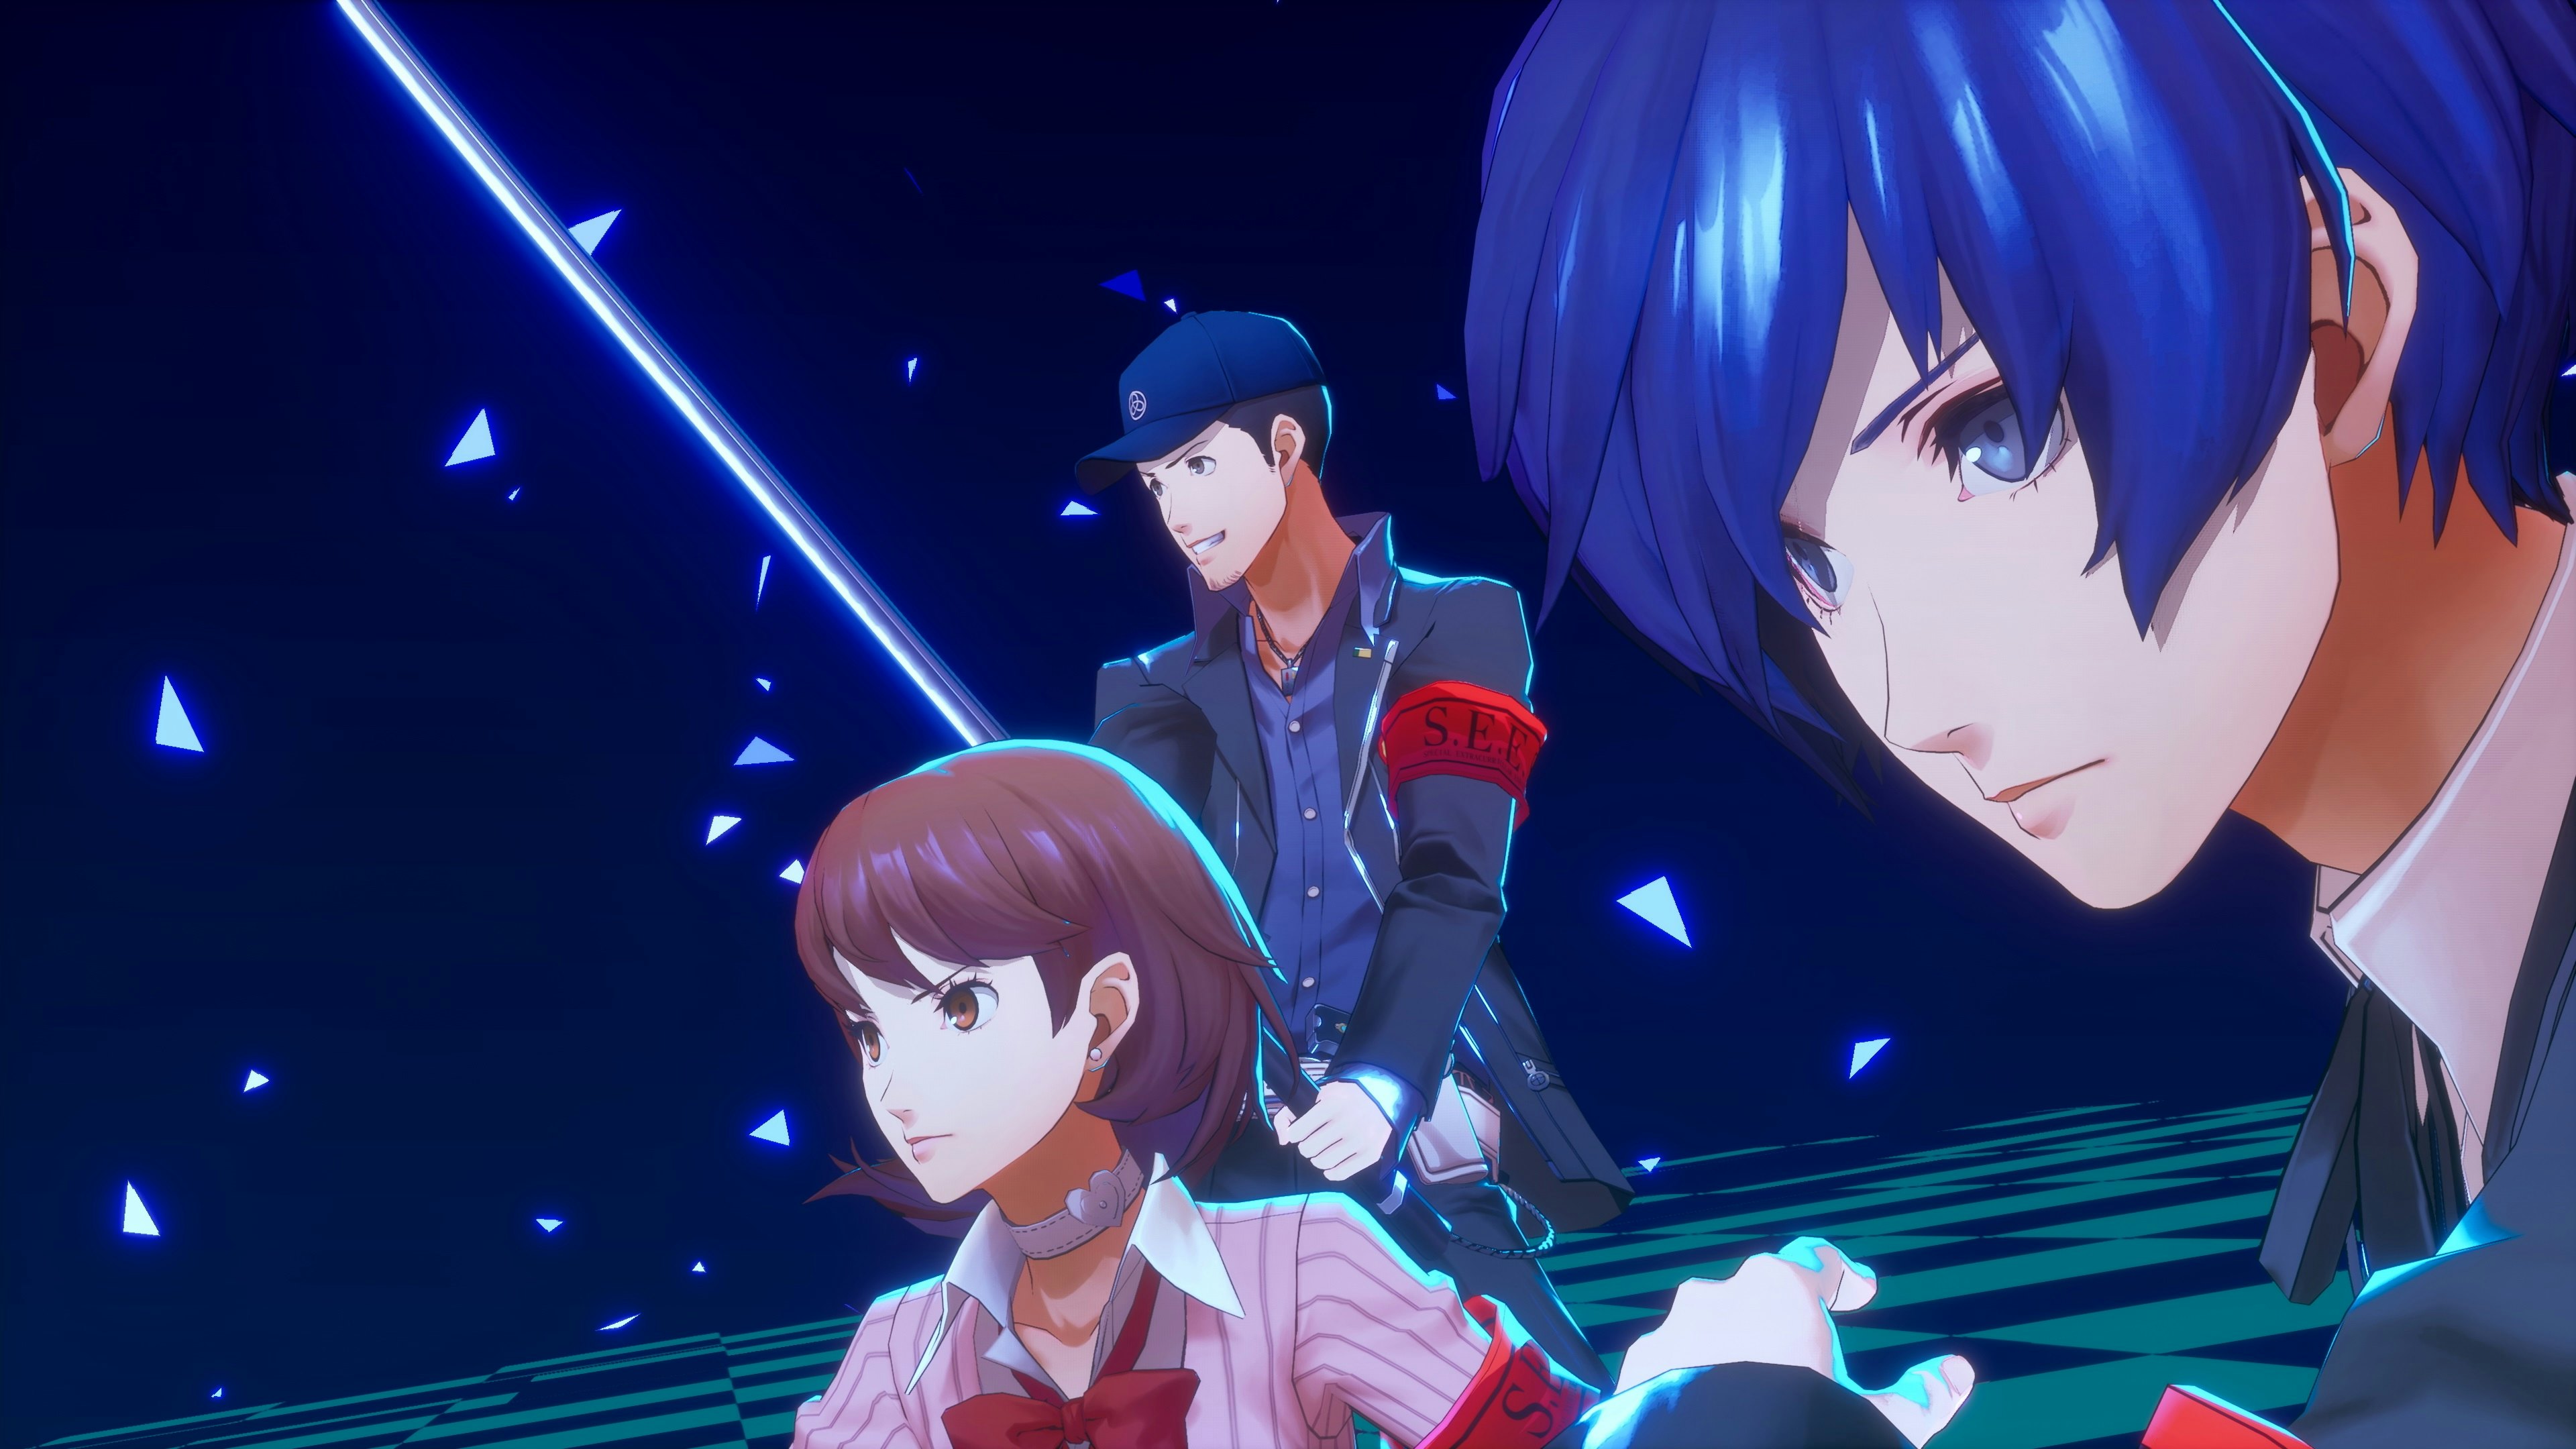 Persona 3 Portable - Official Launch Trailer 